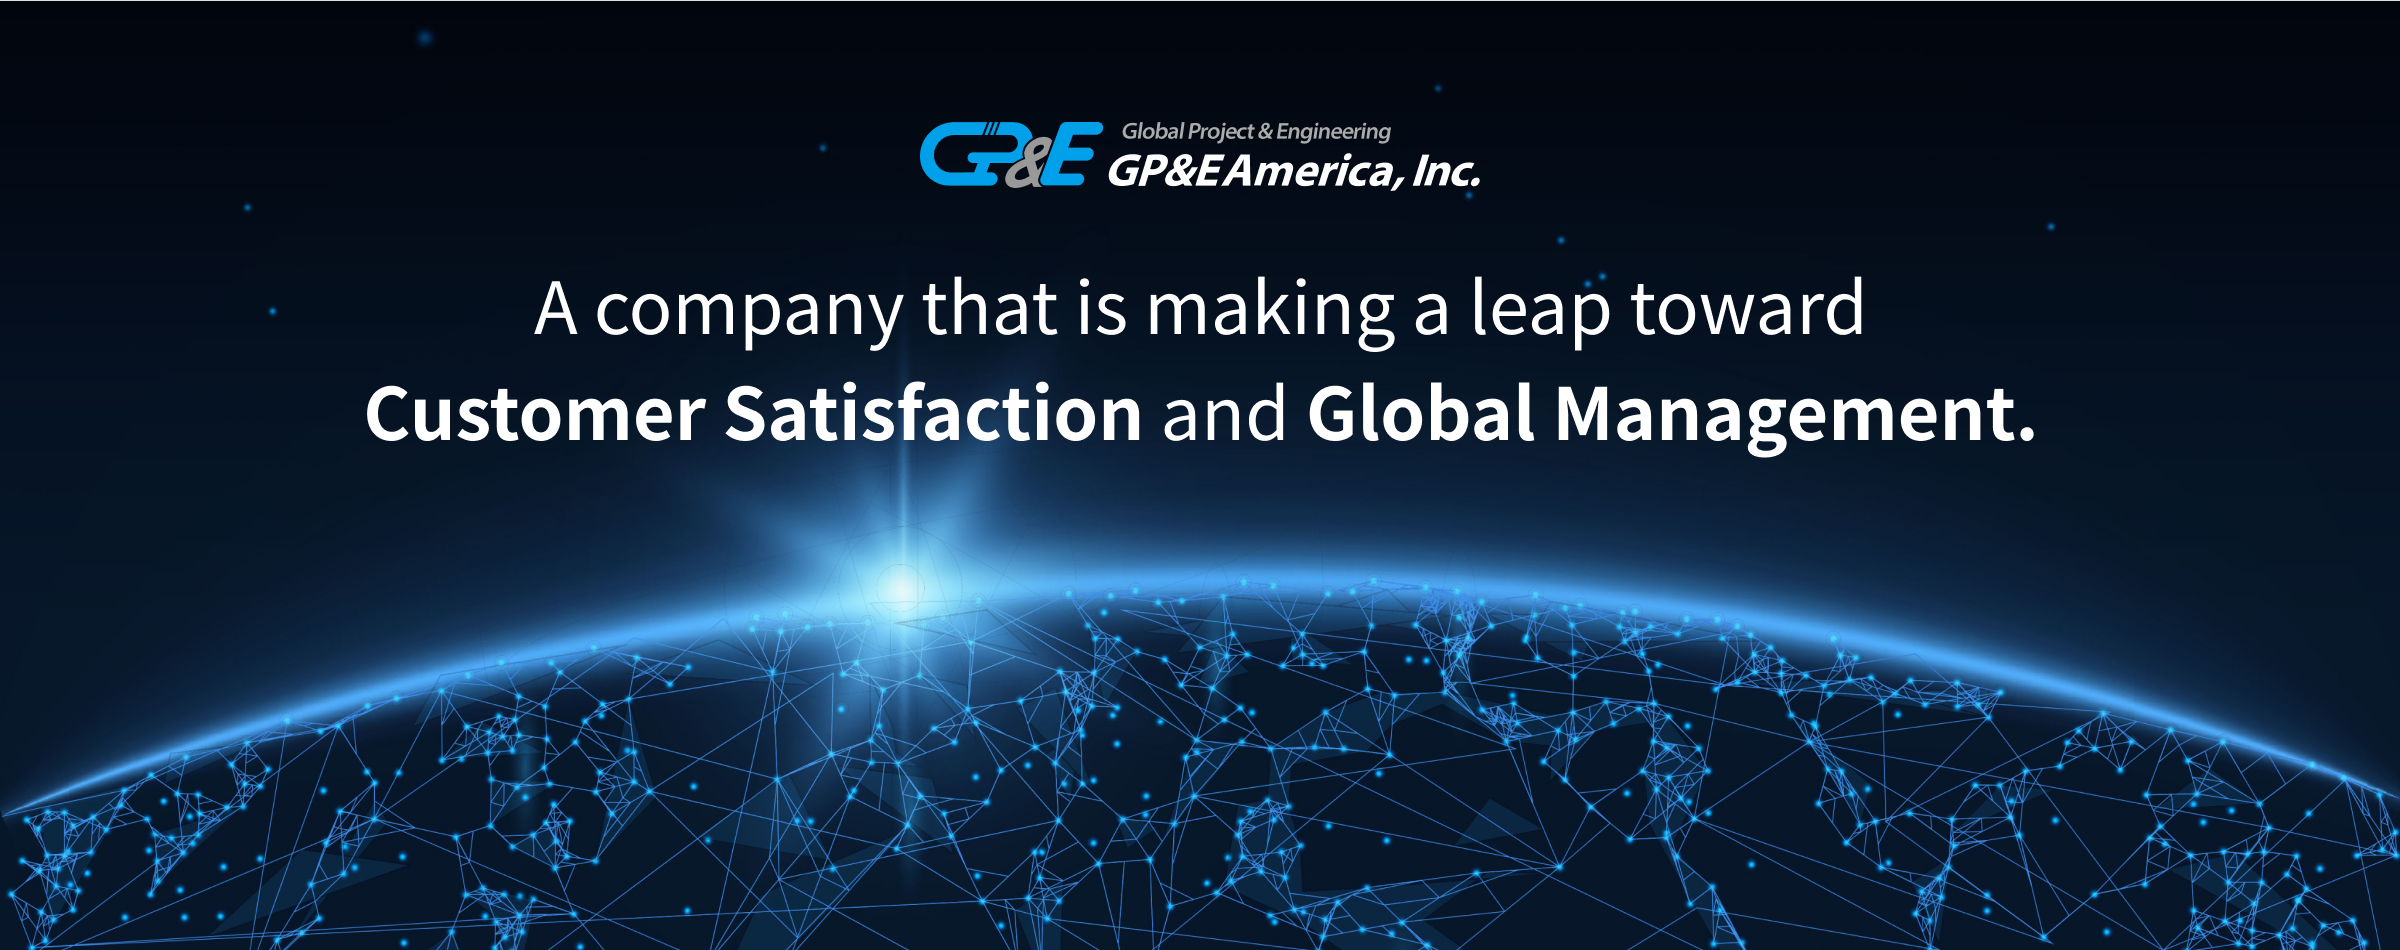 A company that is making a leap towardCustomer Satisfaction and Global Management.